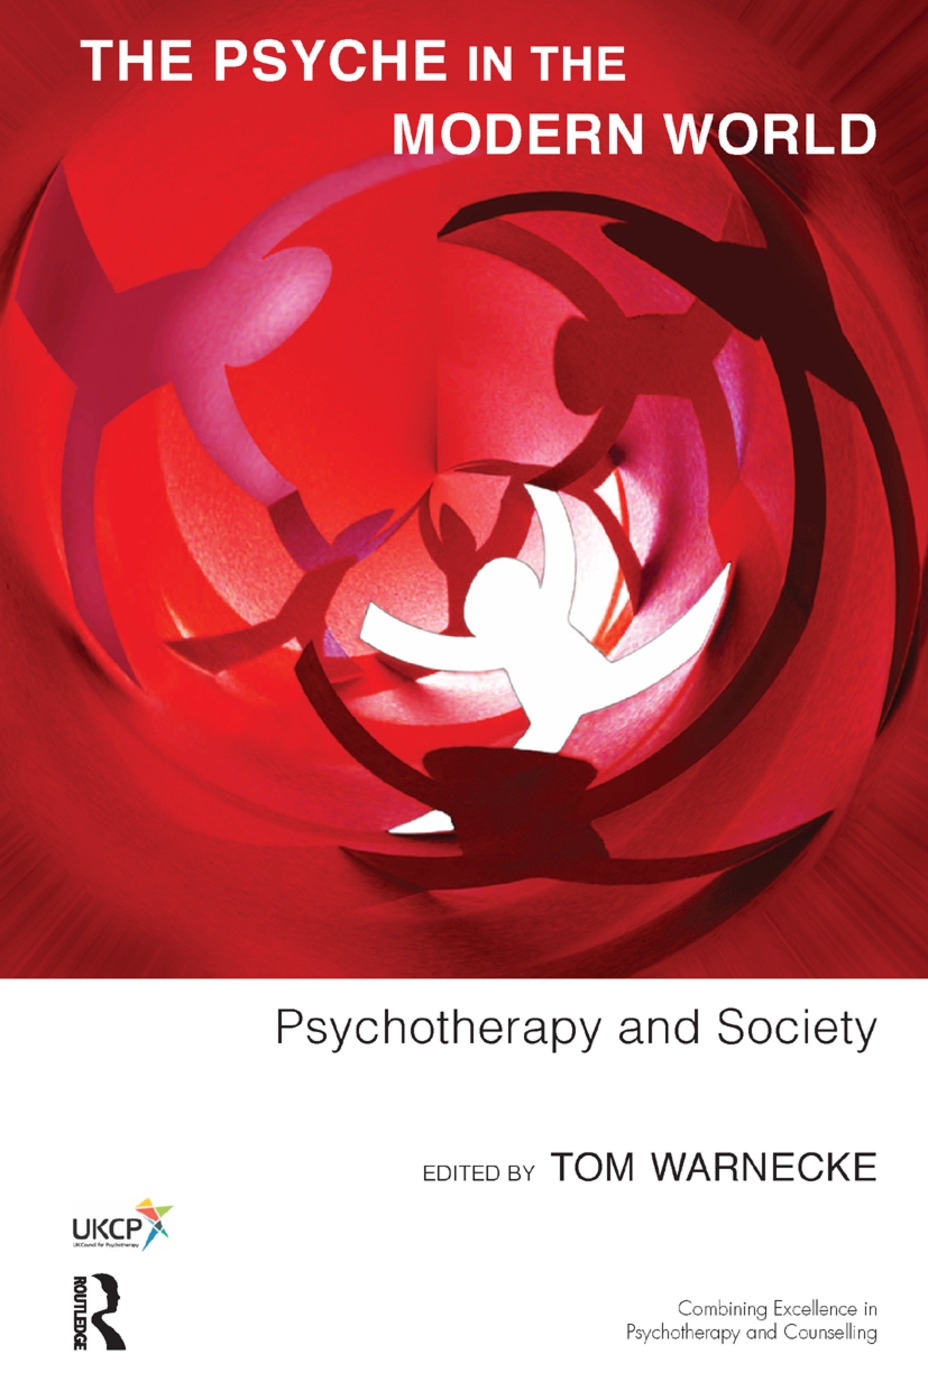 The Psyche in the Modern World: Psychotherapy and Society